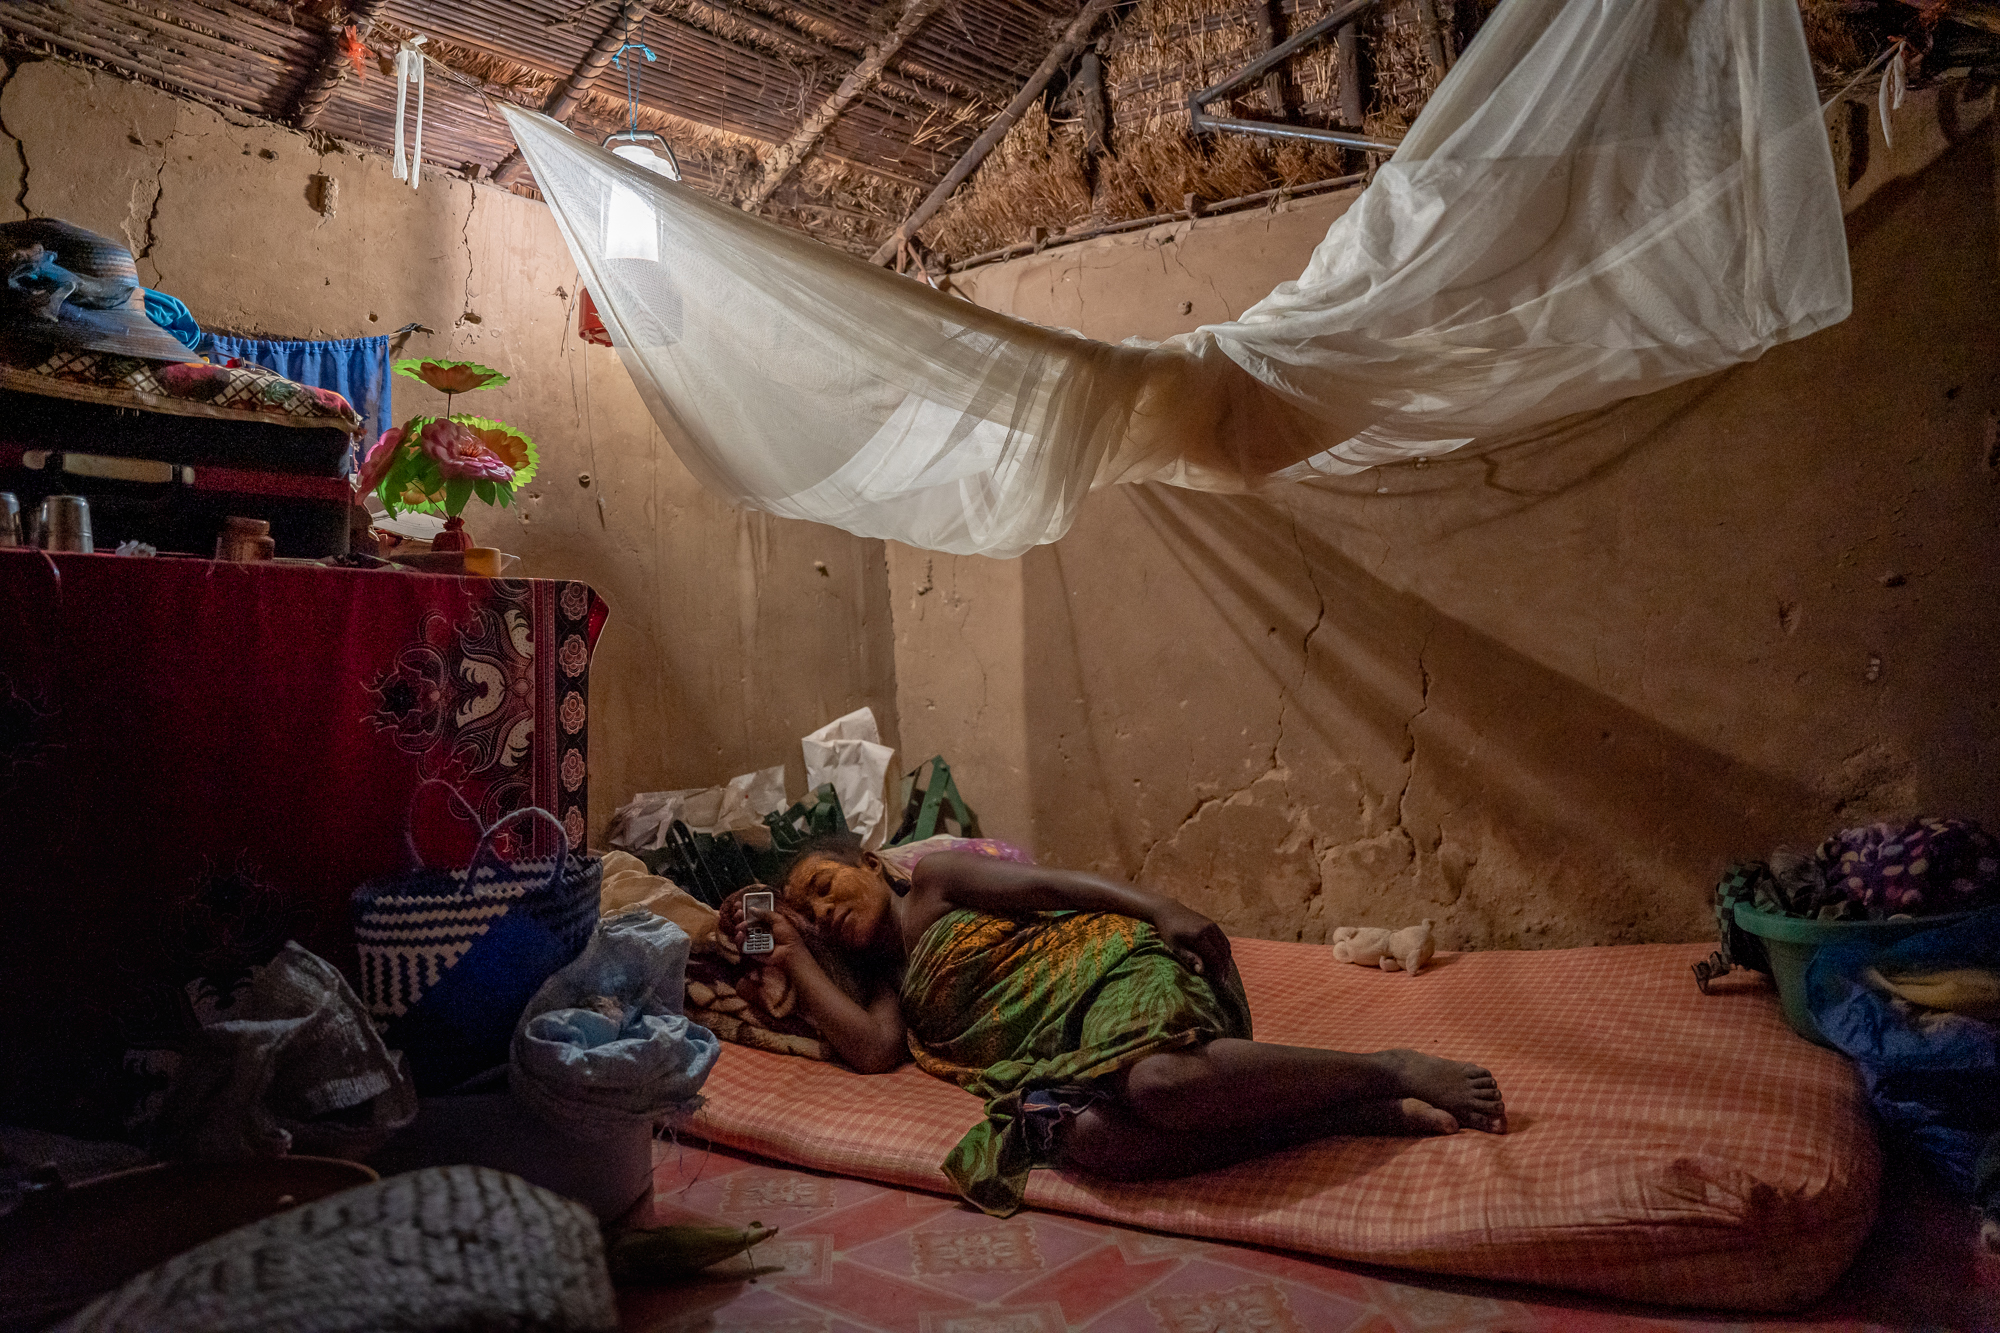 A woman rests inside her illuminated hut.